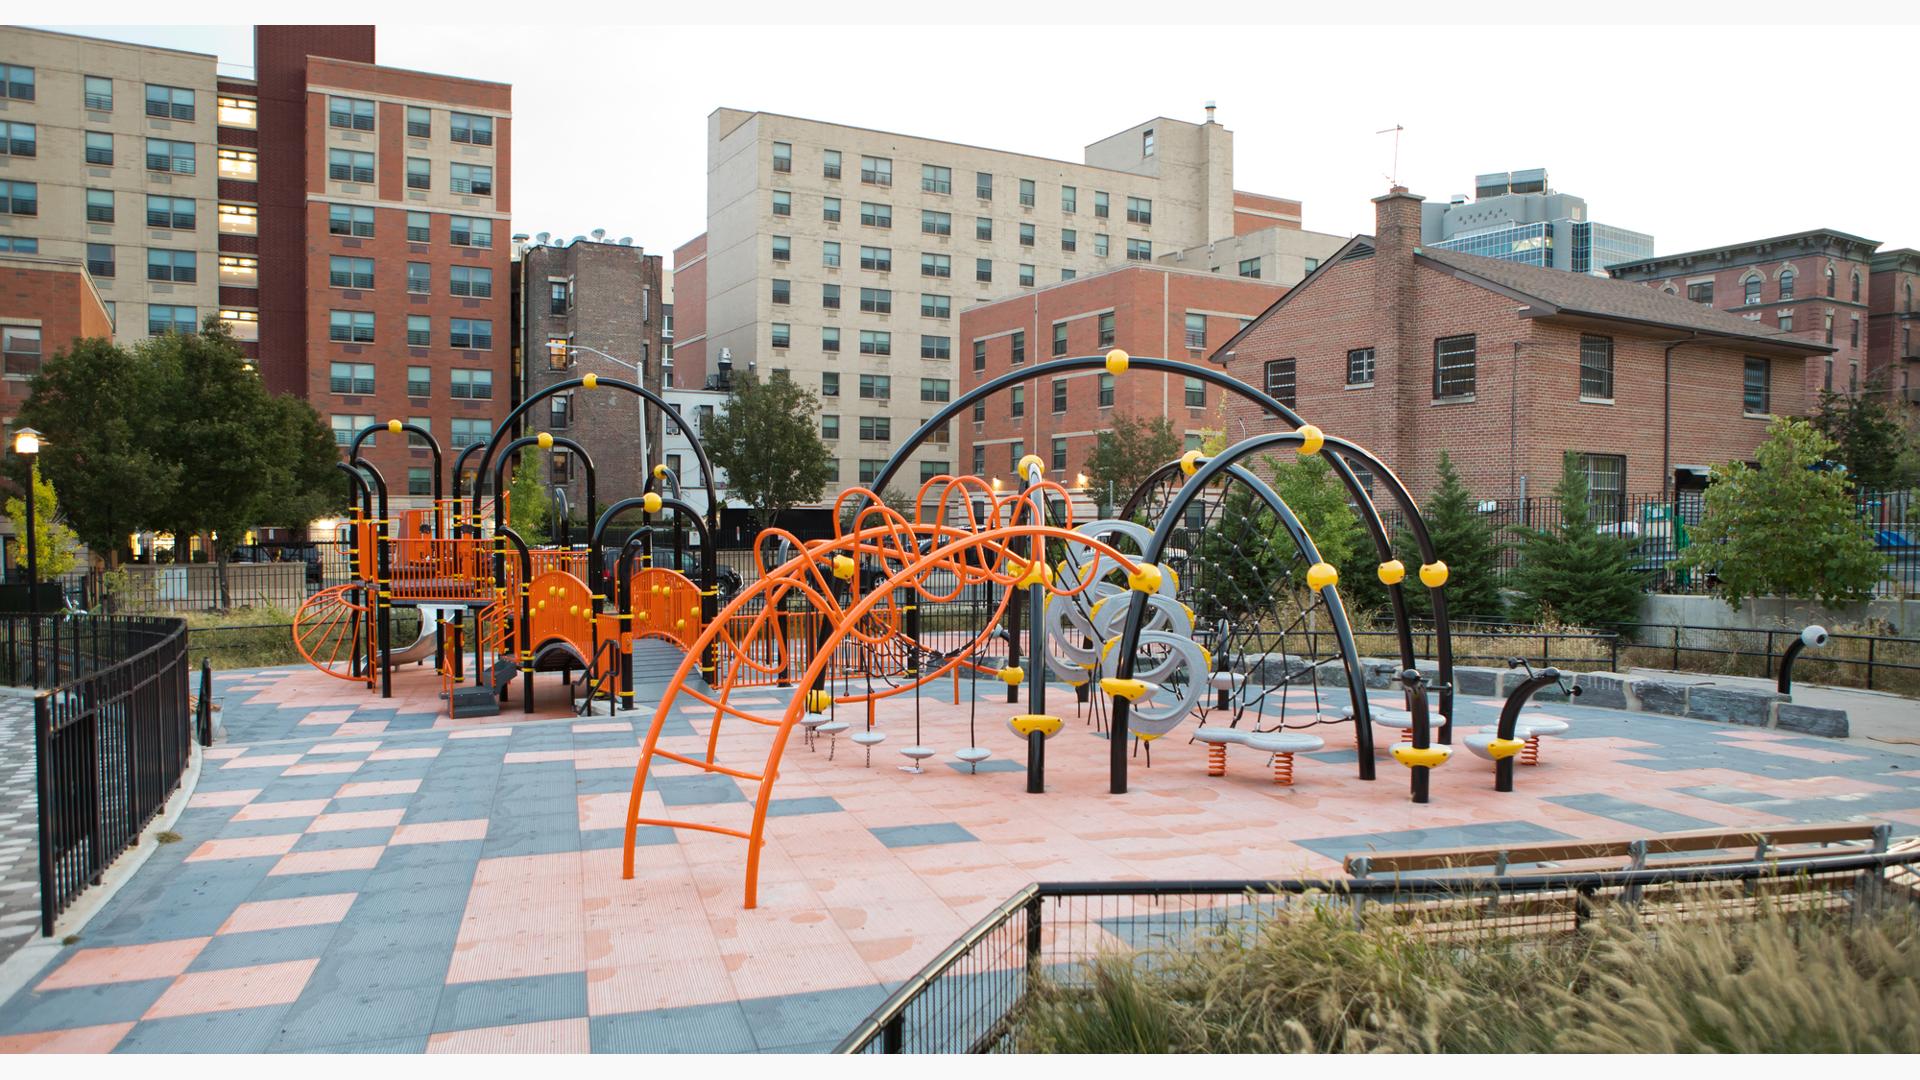 Melrose Park Bronx, NY.  An Evos® playsystem and PlayBooster® play structure linked together.